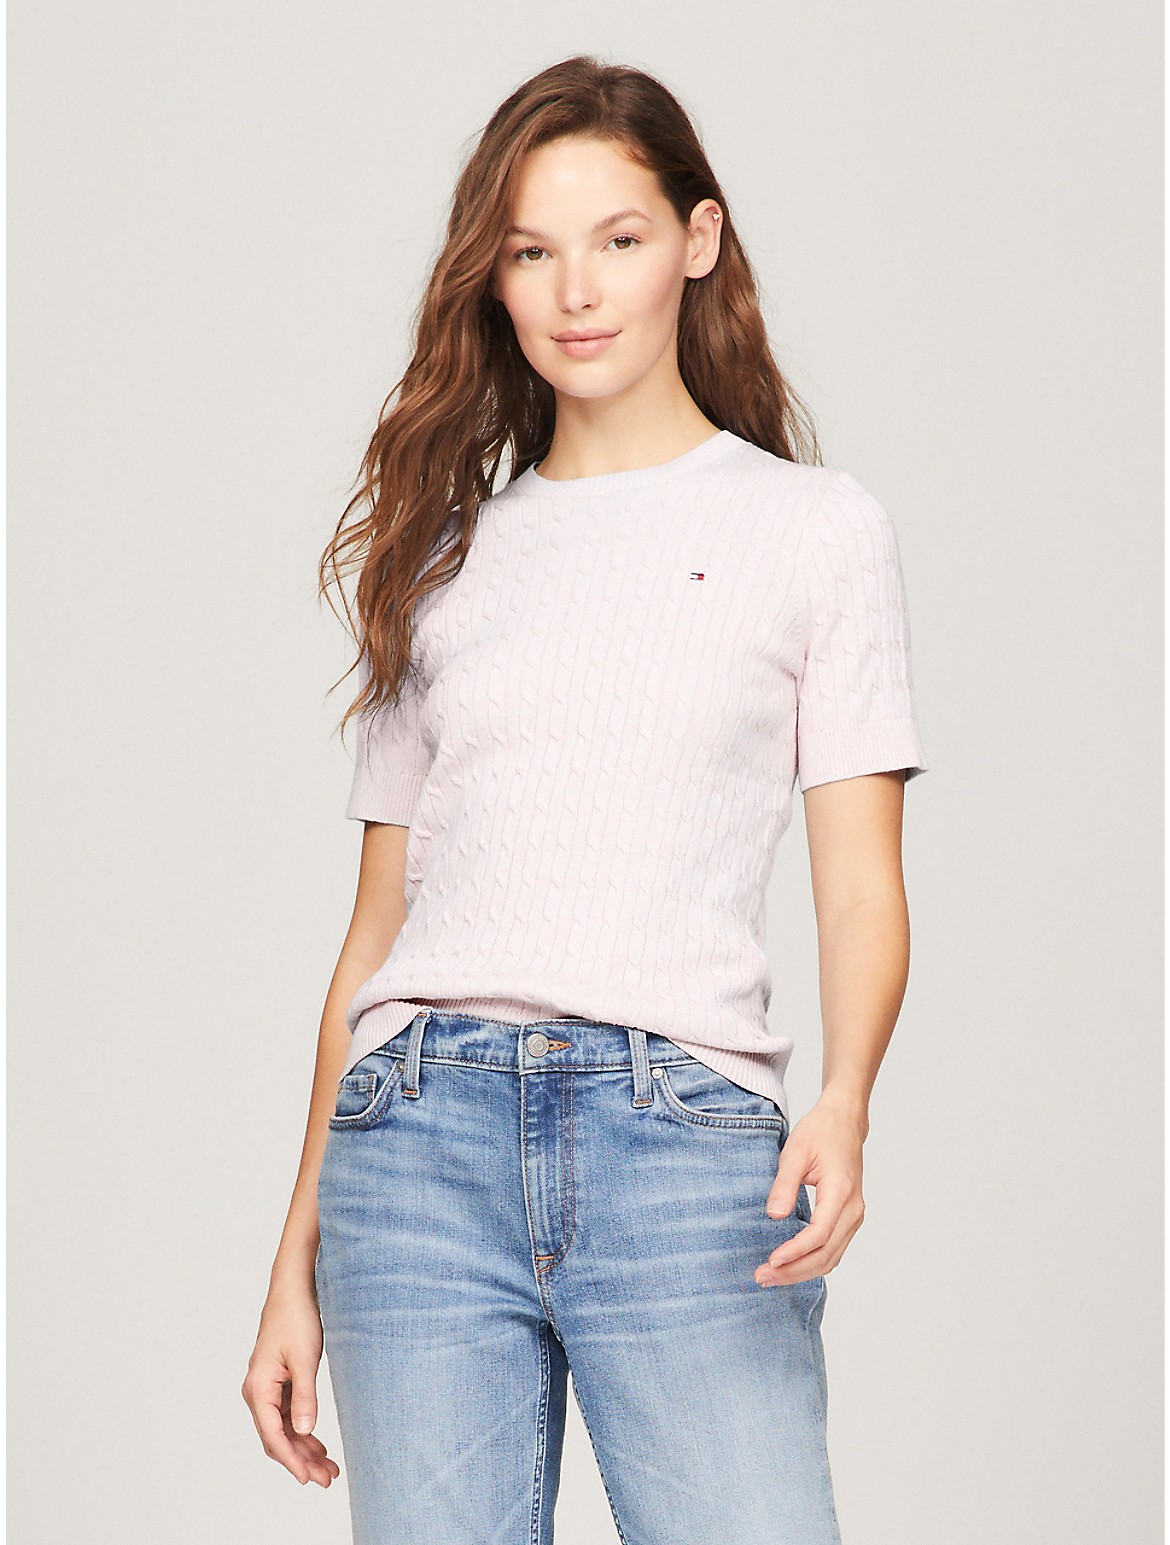 Tommy Hilfiger Women's Short-Sleeve Cable Sweater